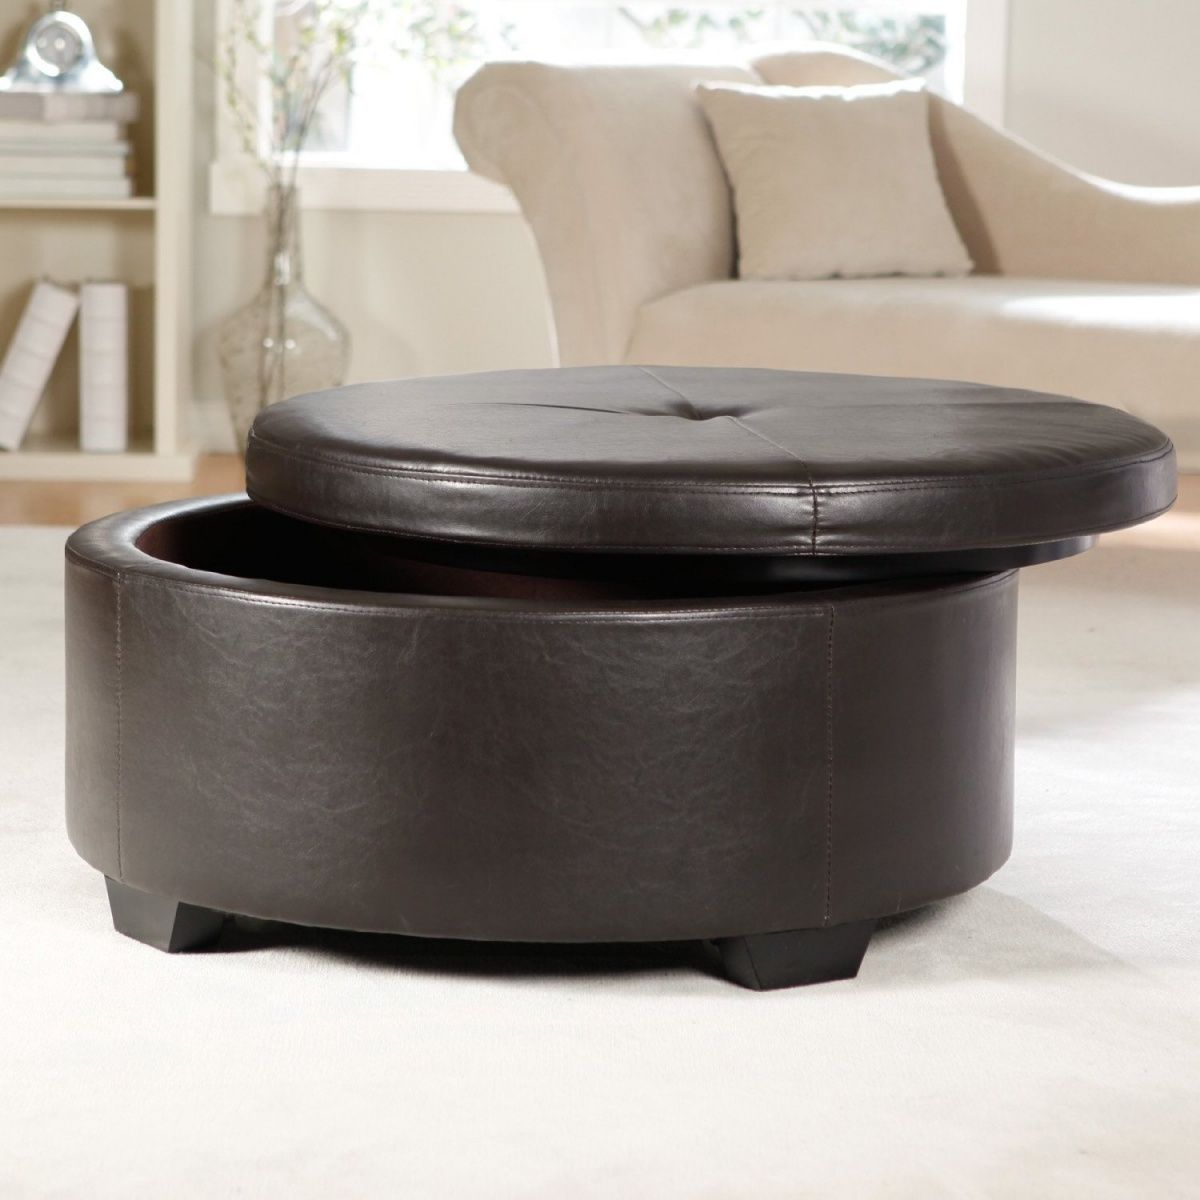 Ottoman Round Coffee Table You Have To Know That The Glass Coffee Table Has The Expensive Price To Deal (View 9 of 9)